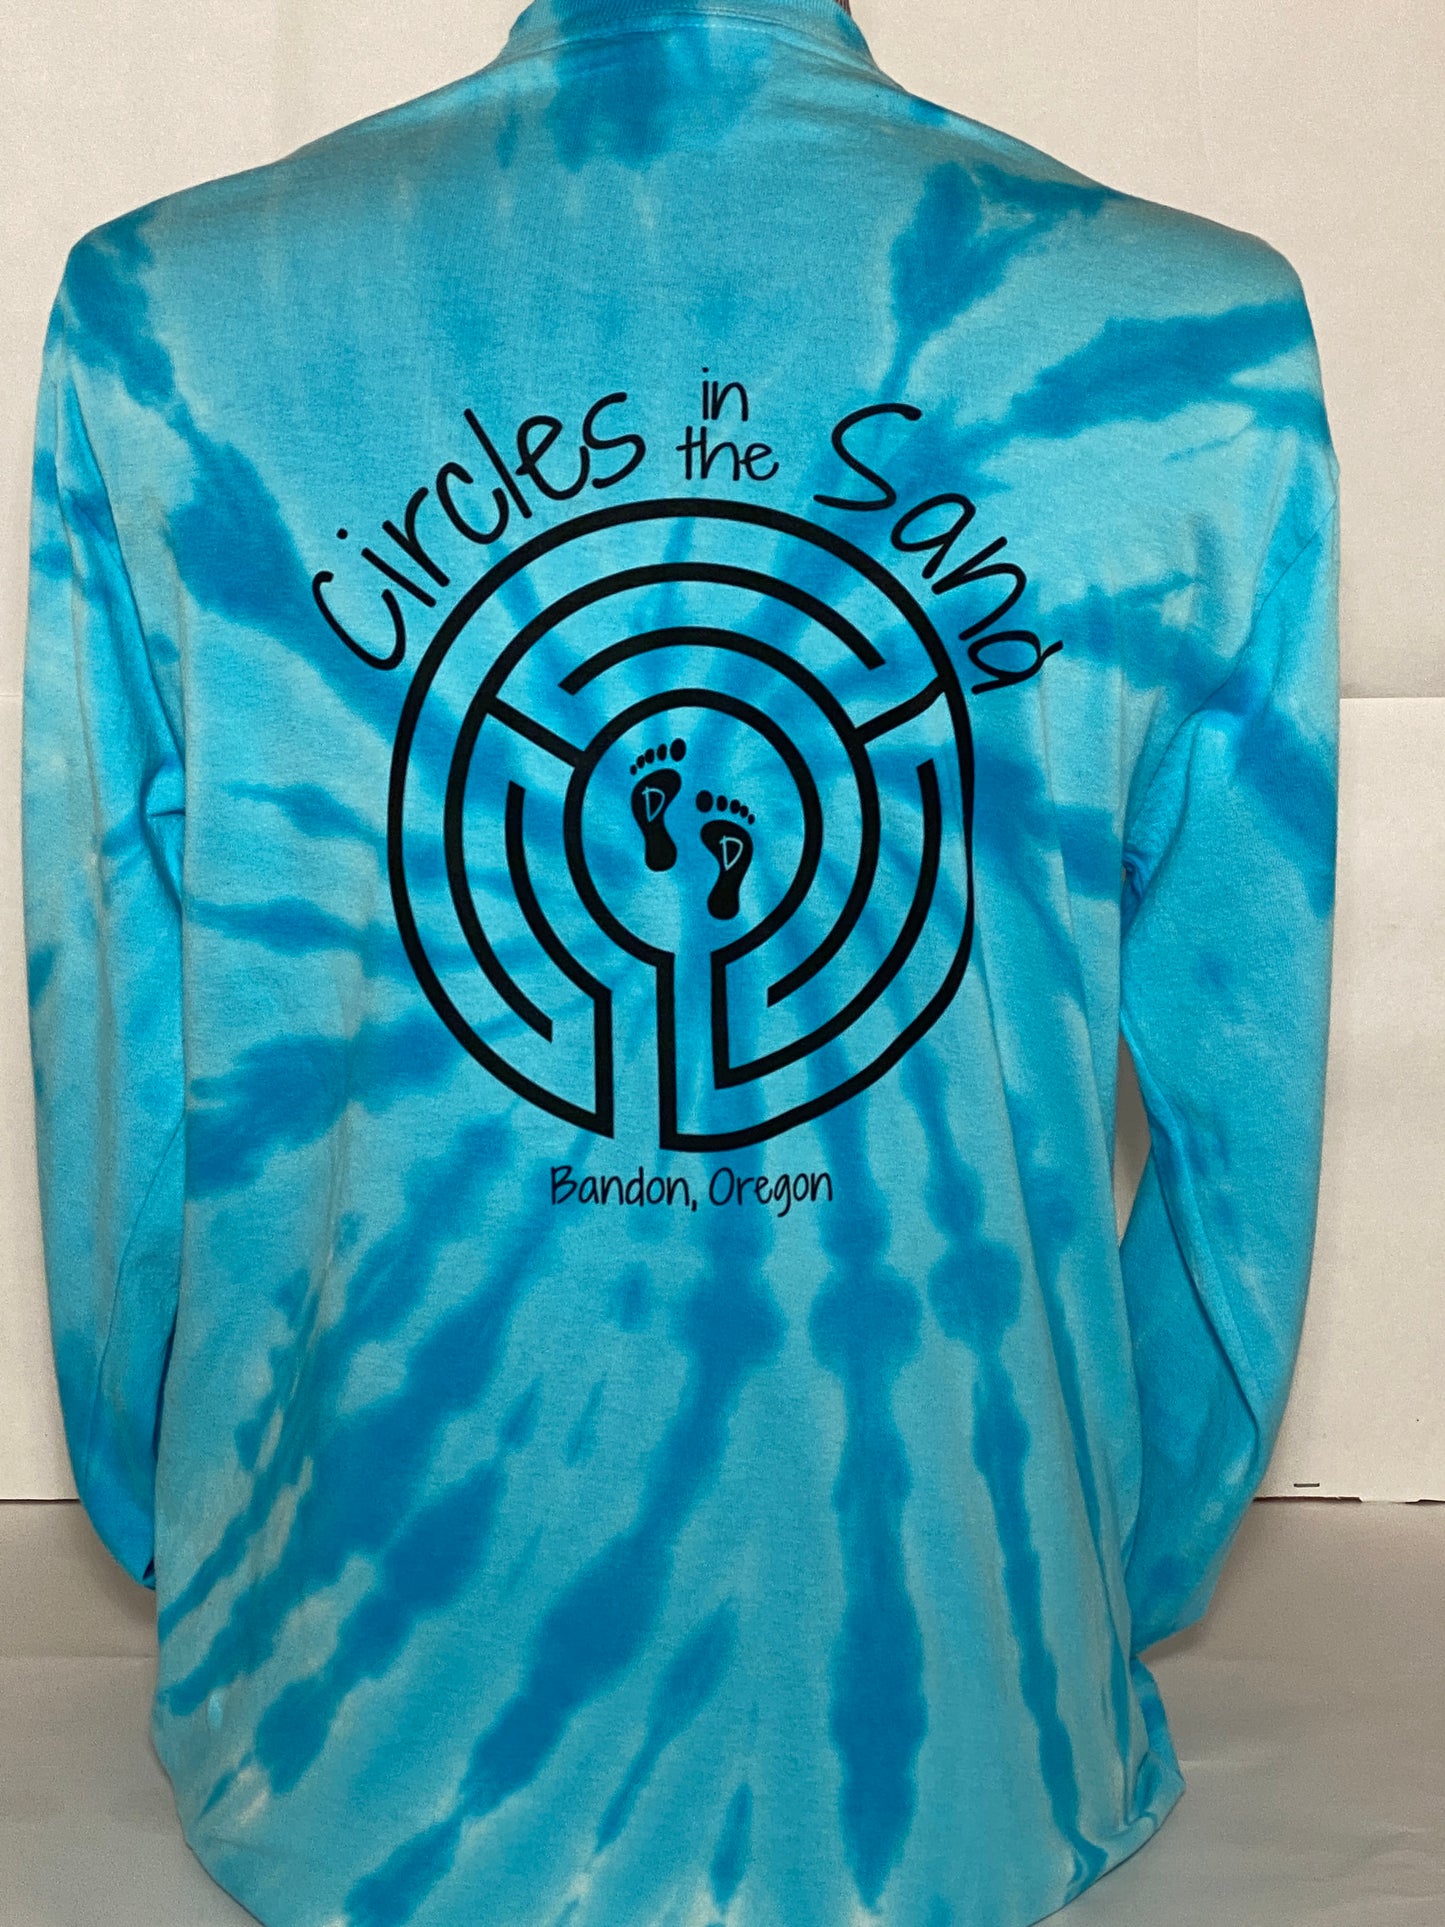 "See you on the sand" Tie-dyed Turquoise Unisex Long-sleeved T-shirt